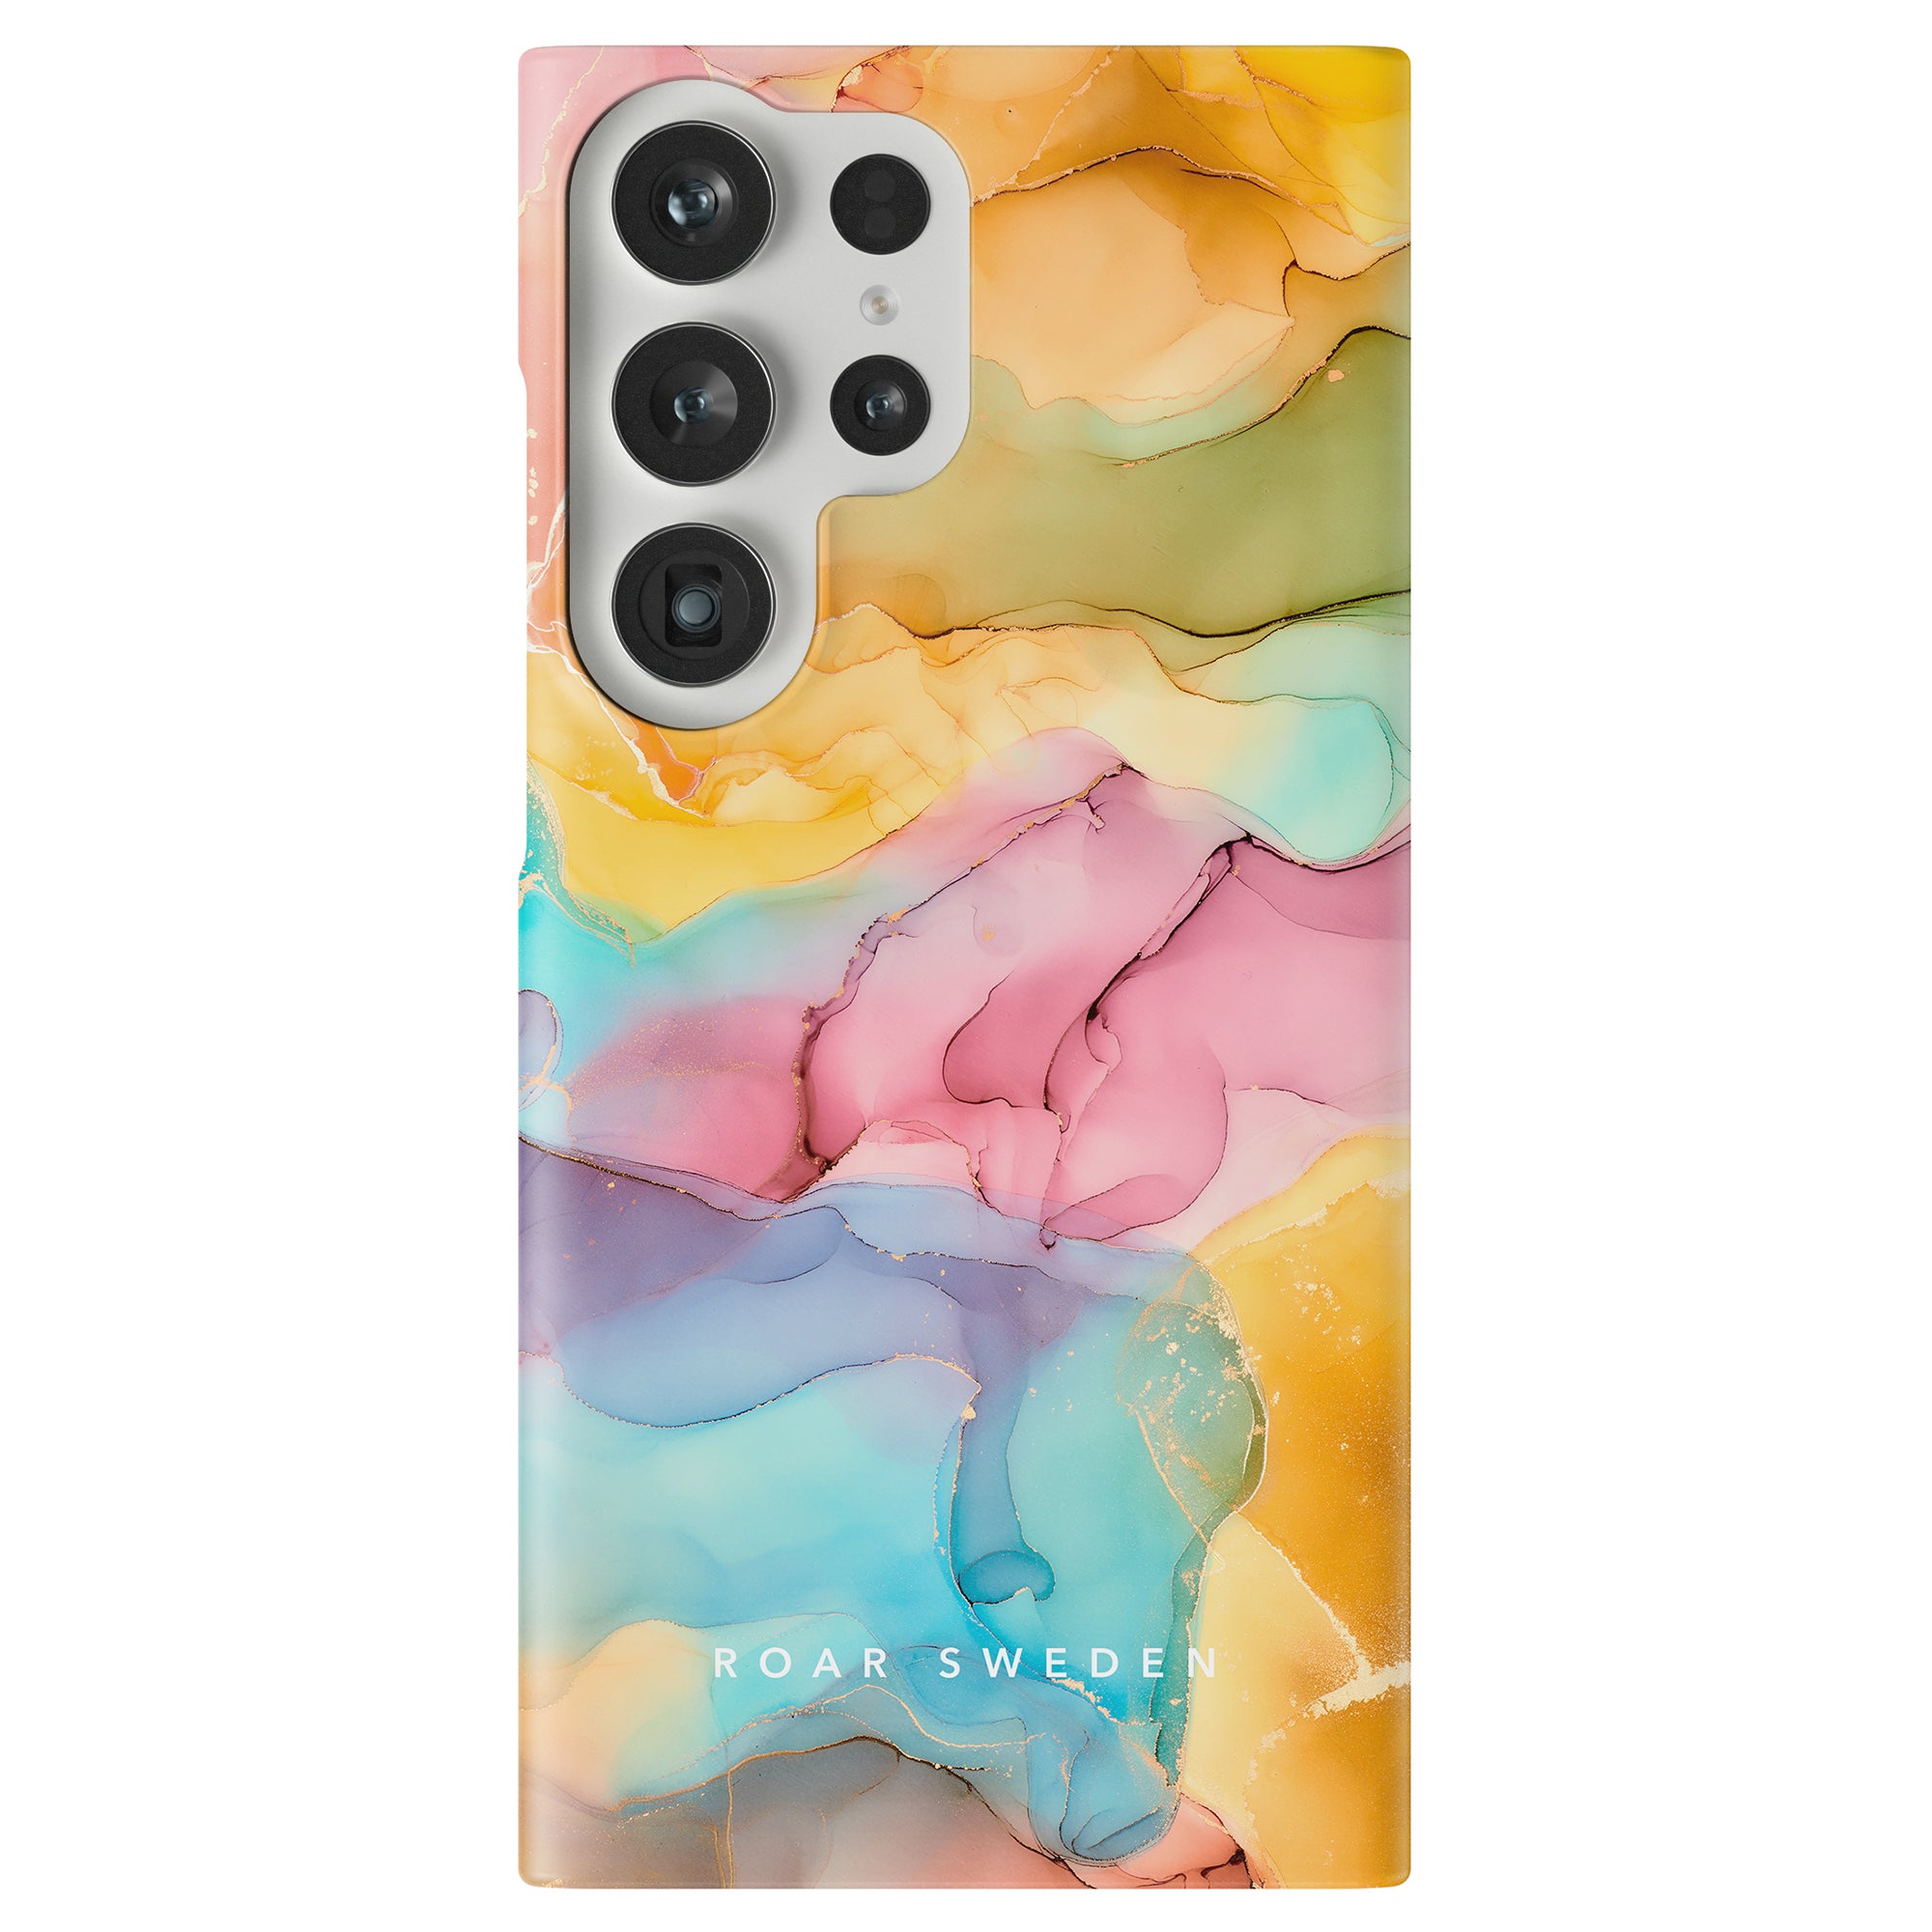 A Summer Breeze - Slim case,with a colorful marble pattern that skyddar mobil.